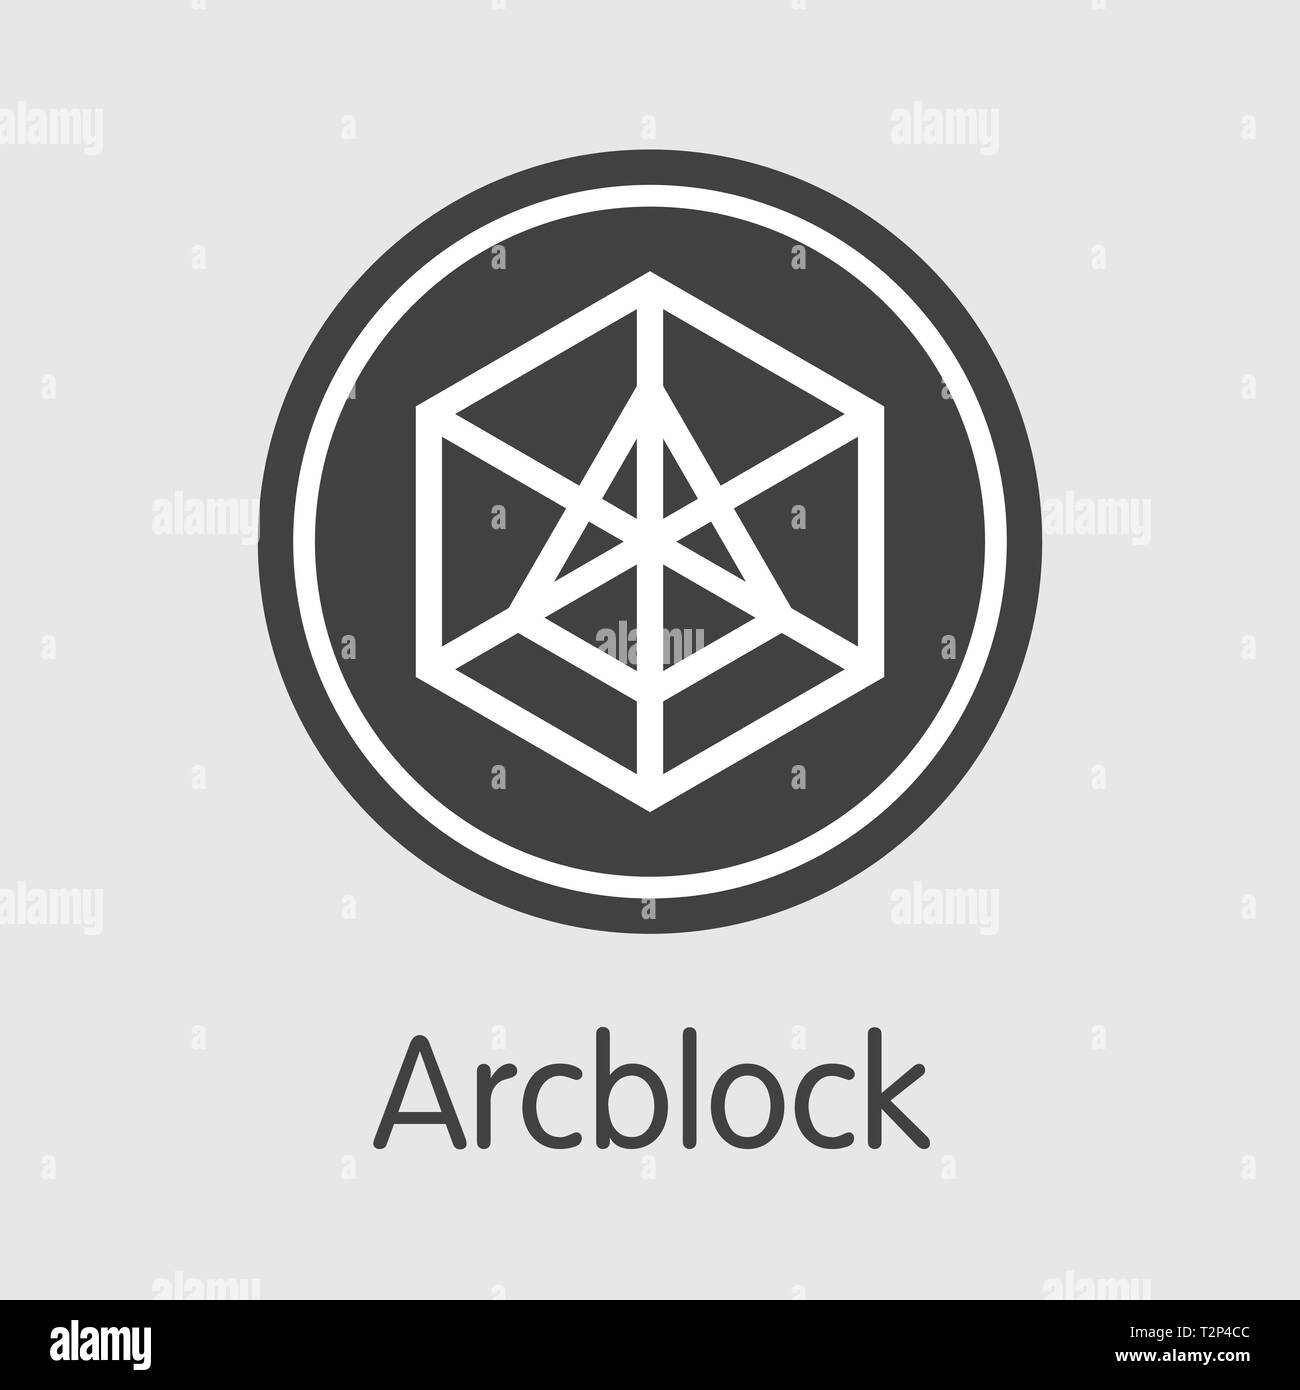 ABT - Arcblock. The Trade Logo or Emblem of Virtual Momey, Market Emblem, ICOs Coins and Tokens Icon. Stock Vector